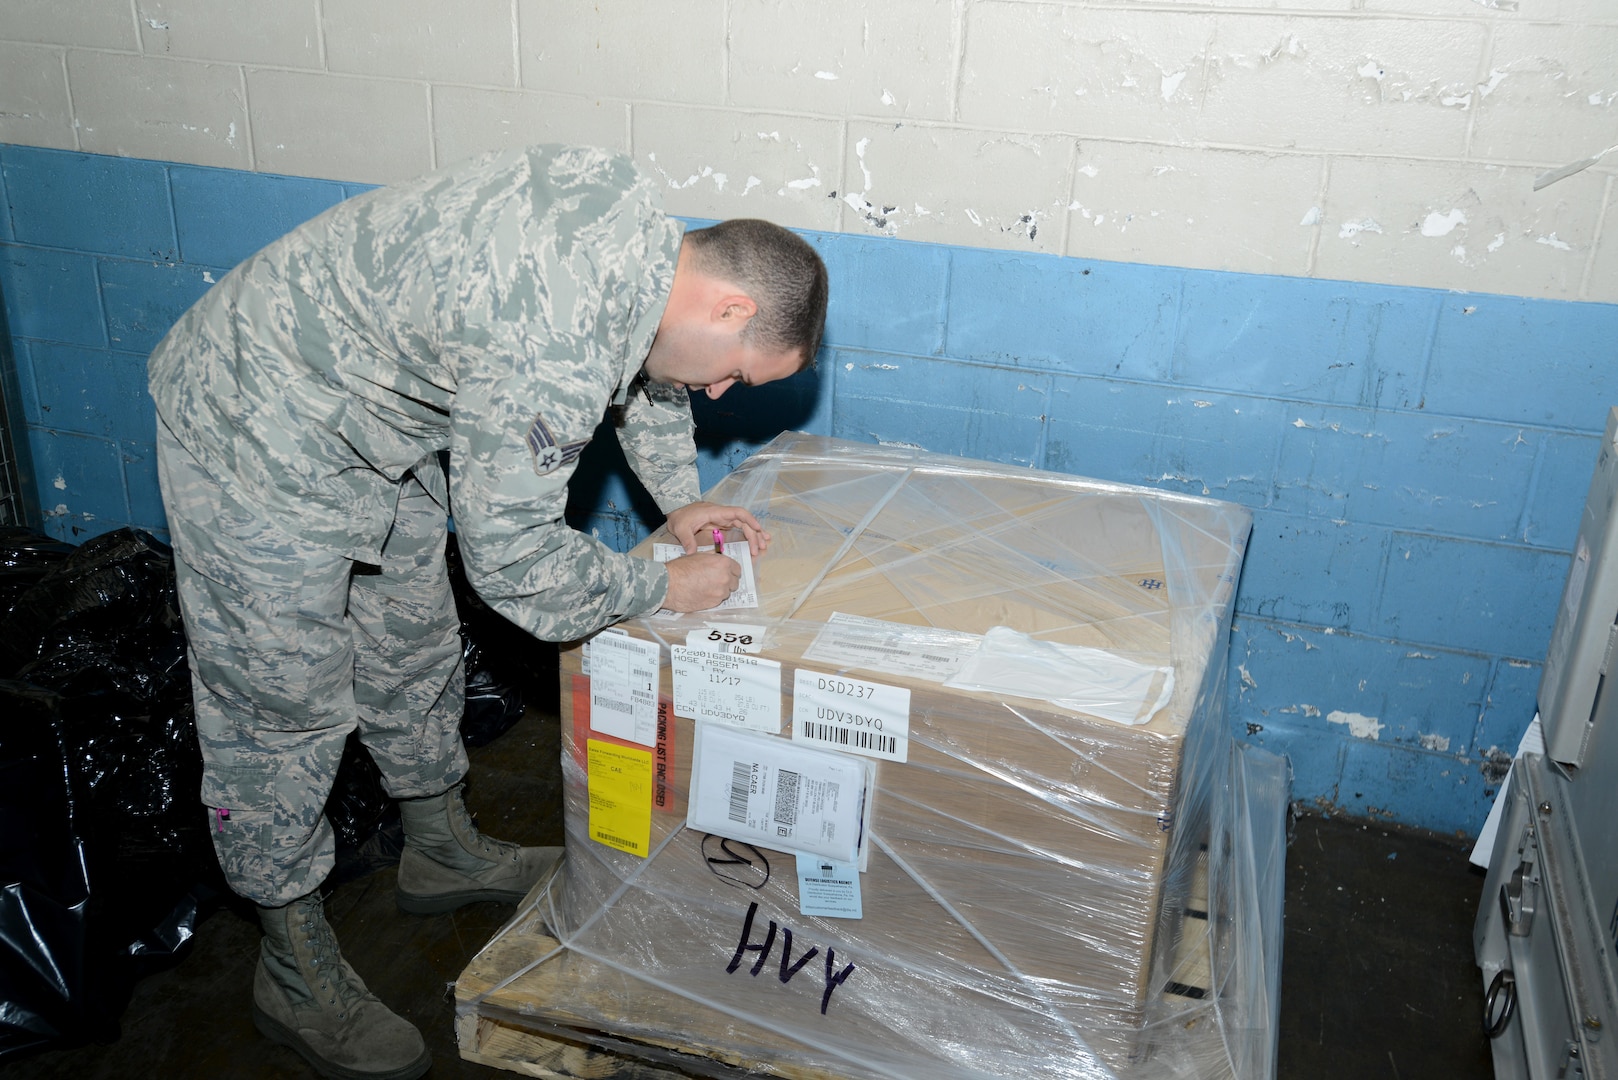 U.S. Air Force Senior Airman Adam Roberts, 20th Logistics Readiness Squadron (LRS) transportation management office inbound supervisor, signs a label for a package at Shaw Air Force Base, South Carolina, Nov. 29, 2017.